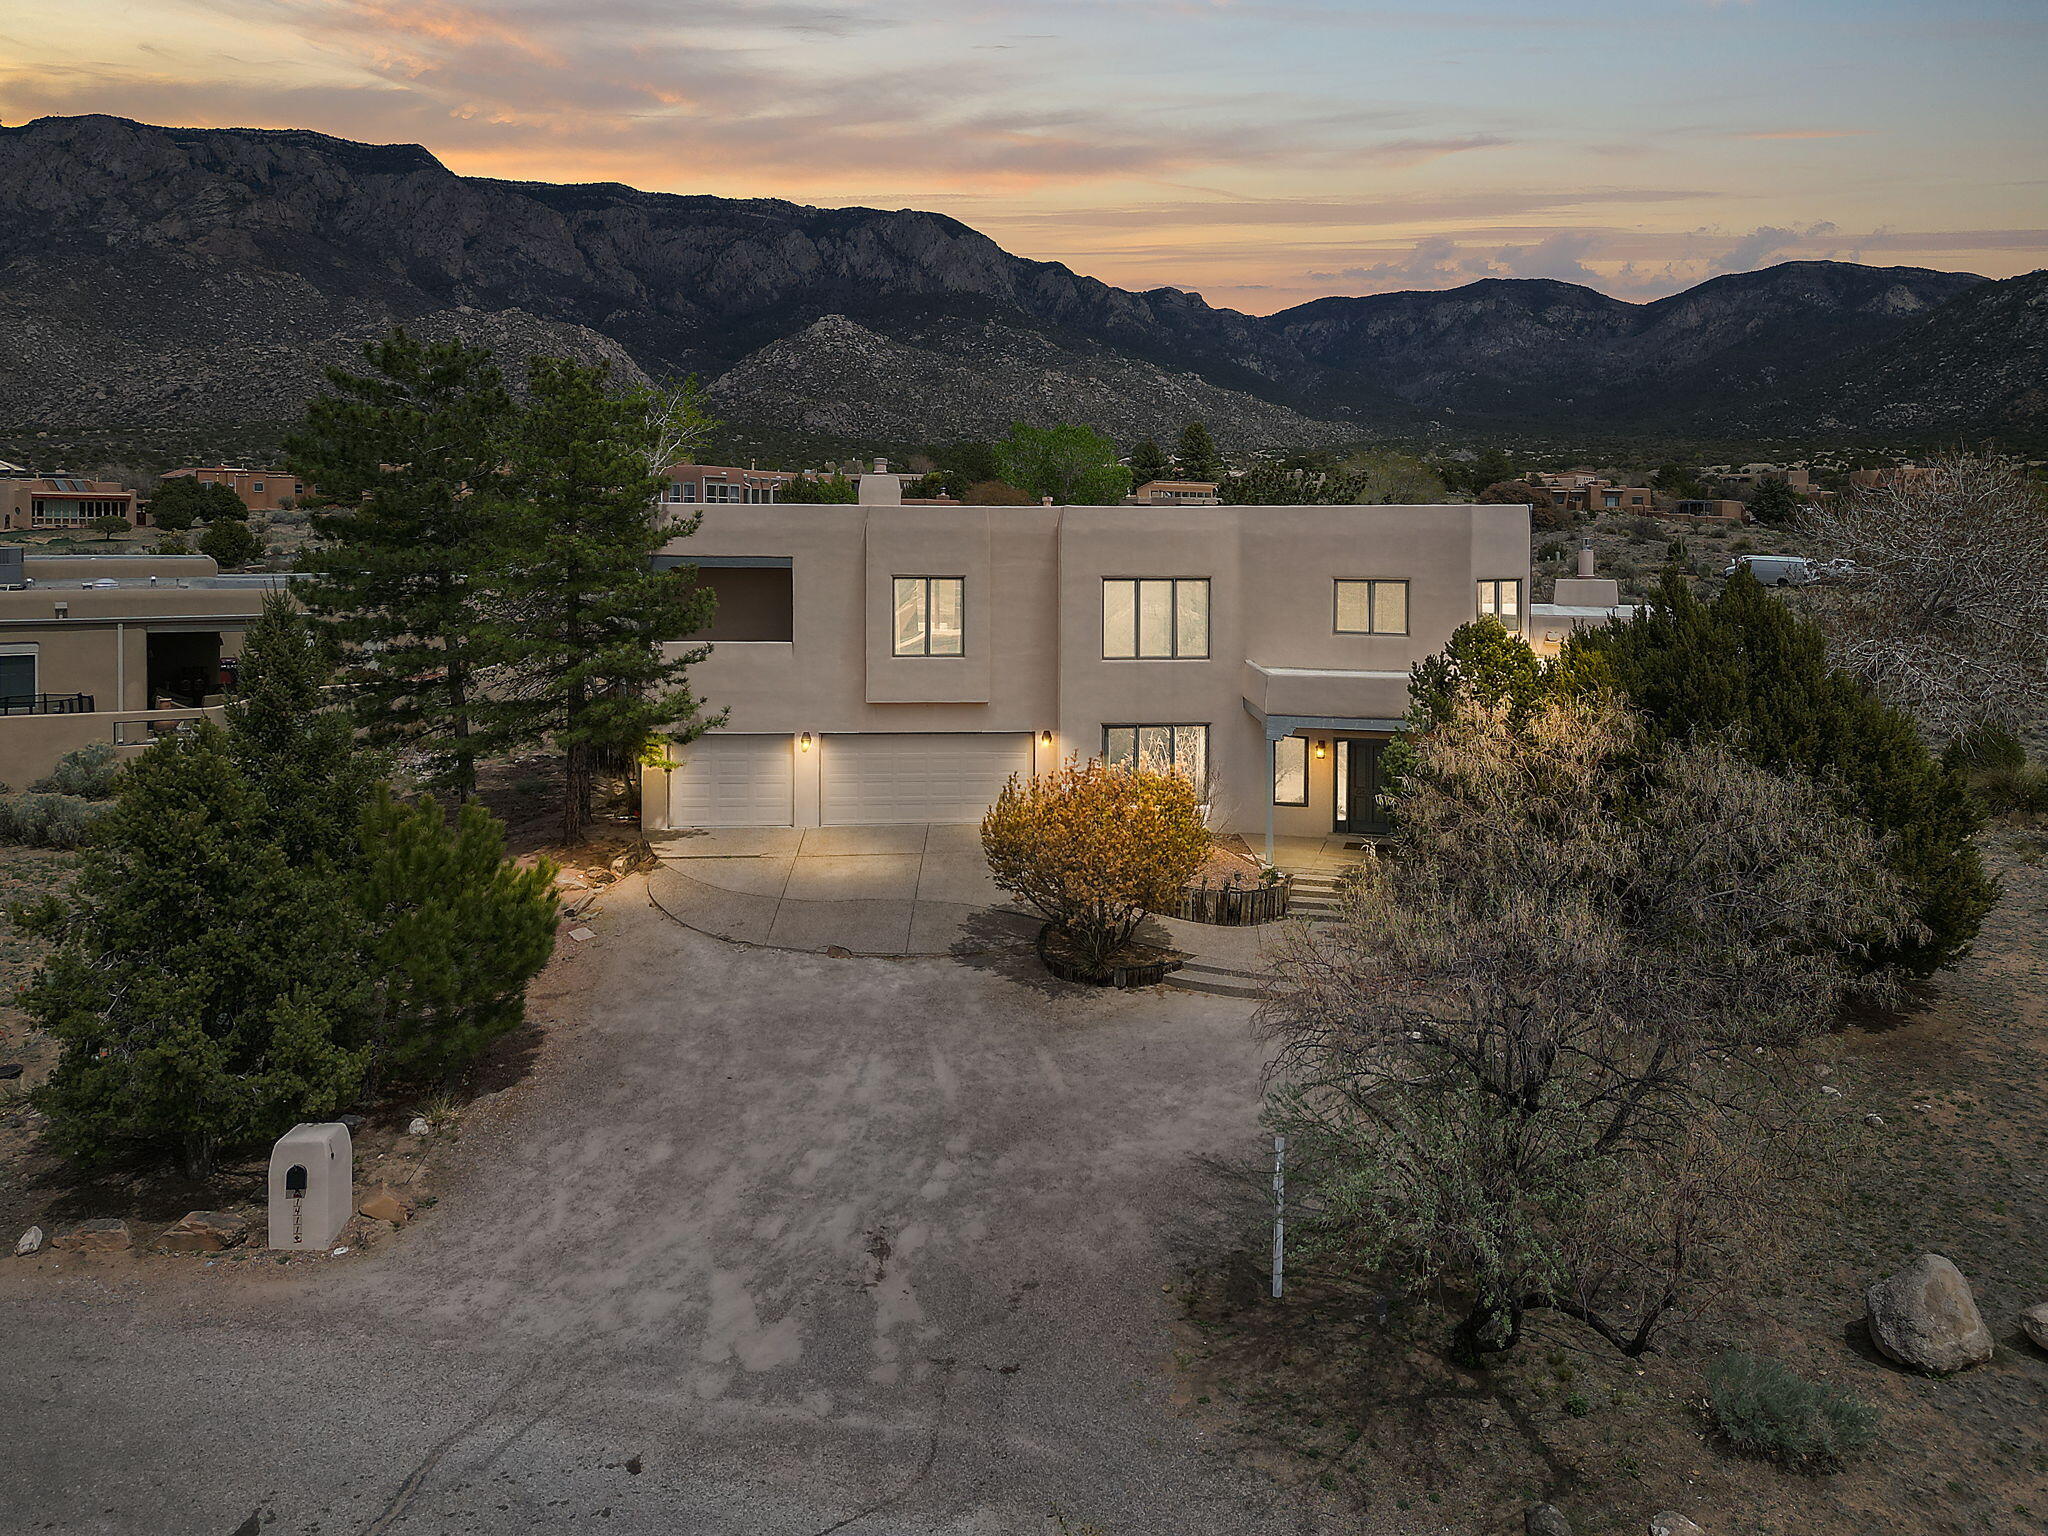 Welcome to this charming haven on an exceptional elevated cul de sac lot in much sought after Sandia Heights! This Custom David Hunt home offers an open layout, abundant natural light, dramatic raised ceilings, and stunning Sandia Mountain and city VIEWS! Perfect floorplan for a multi-generational family as home features an in-law quarters separate from the rest of the home. The kitchen boasts modern appliances, ample storage and gorgeous new light fixtures. Retreat to the serene primary suite with balcony and fireplace or enjoy the fully landscaped backyard with captivating views and hot tub!  Recent updates include: new upper TPO roof (2024), freshly painted interior, new carpet in primary suite, new sprinkler system, new hot tub cover, new fireplace & new AC head unit for in-law suite